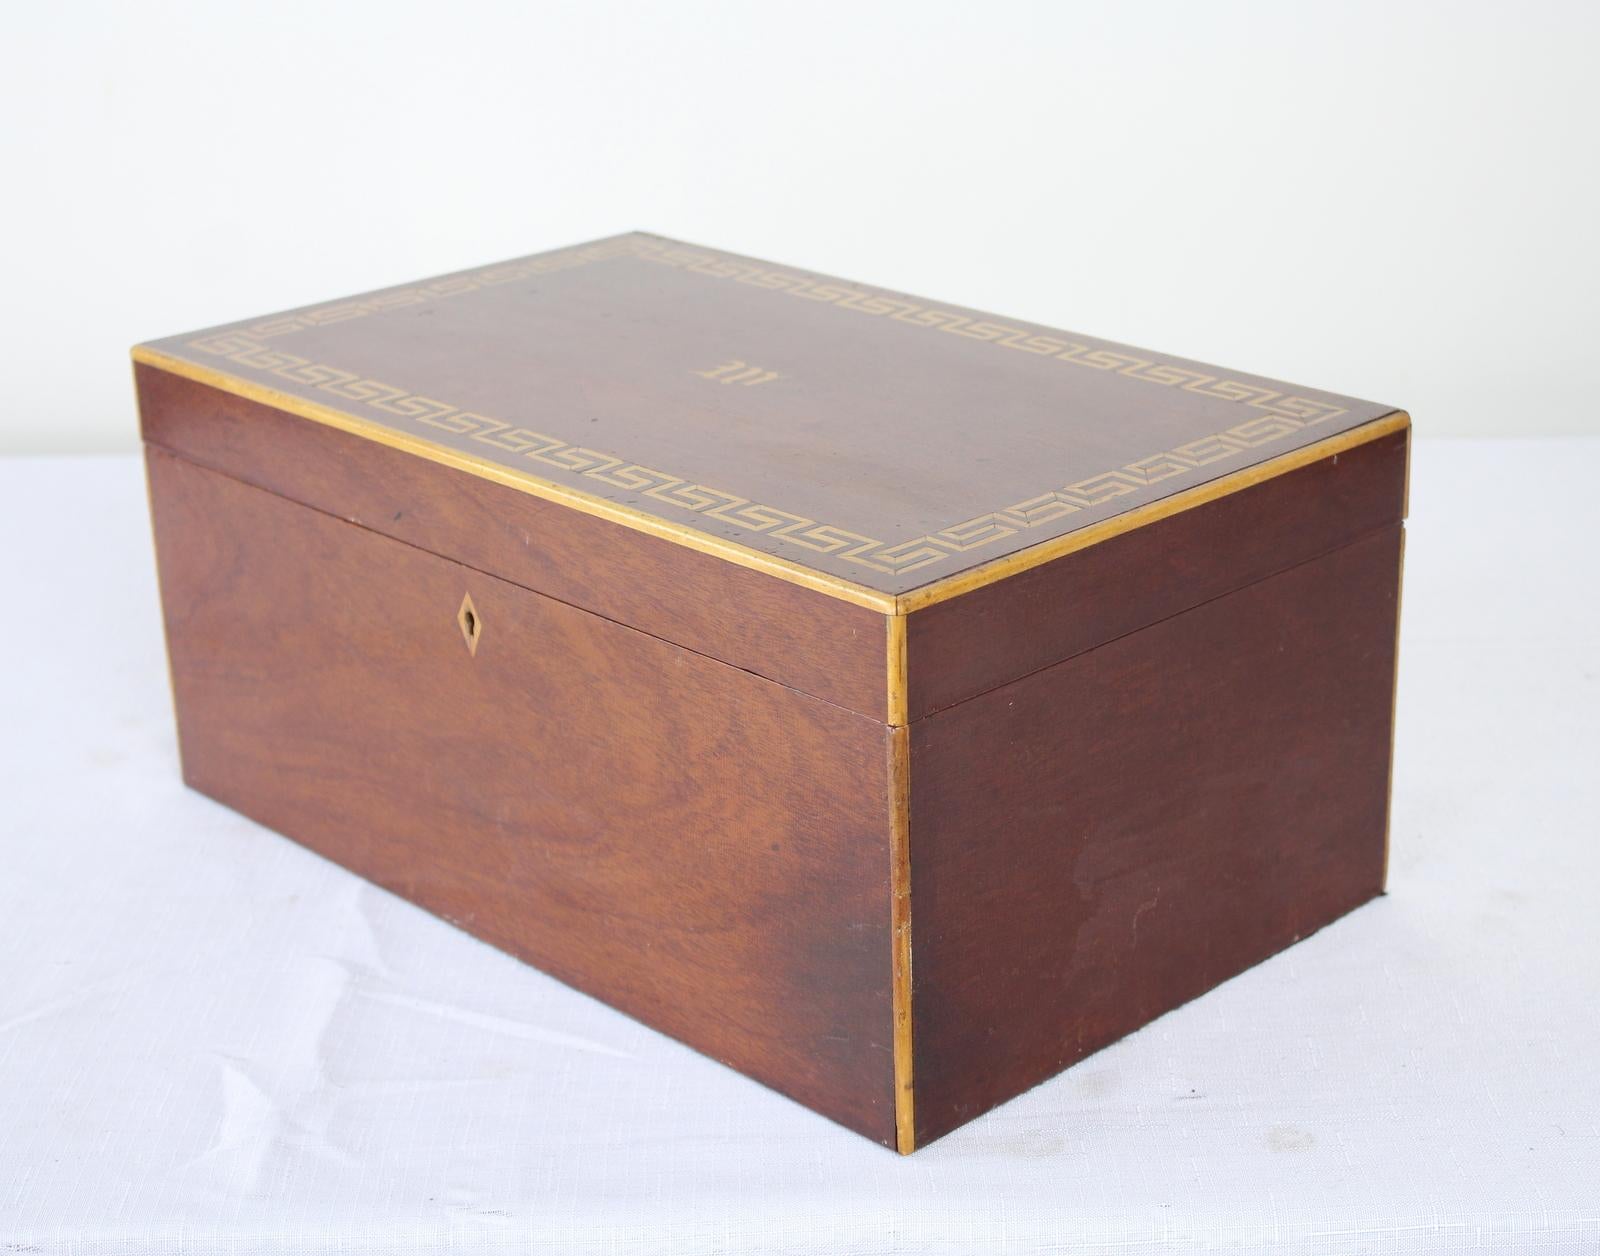 A large pretty jewelry or keepsake box in mellow mahogany with satinwood inlay around the edges, keyhole, and with an elegant W in the middle. The interior is in very good antique condition. Original key.